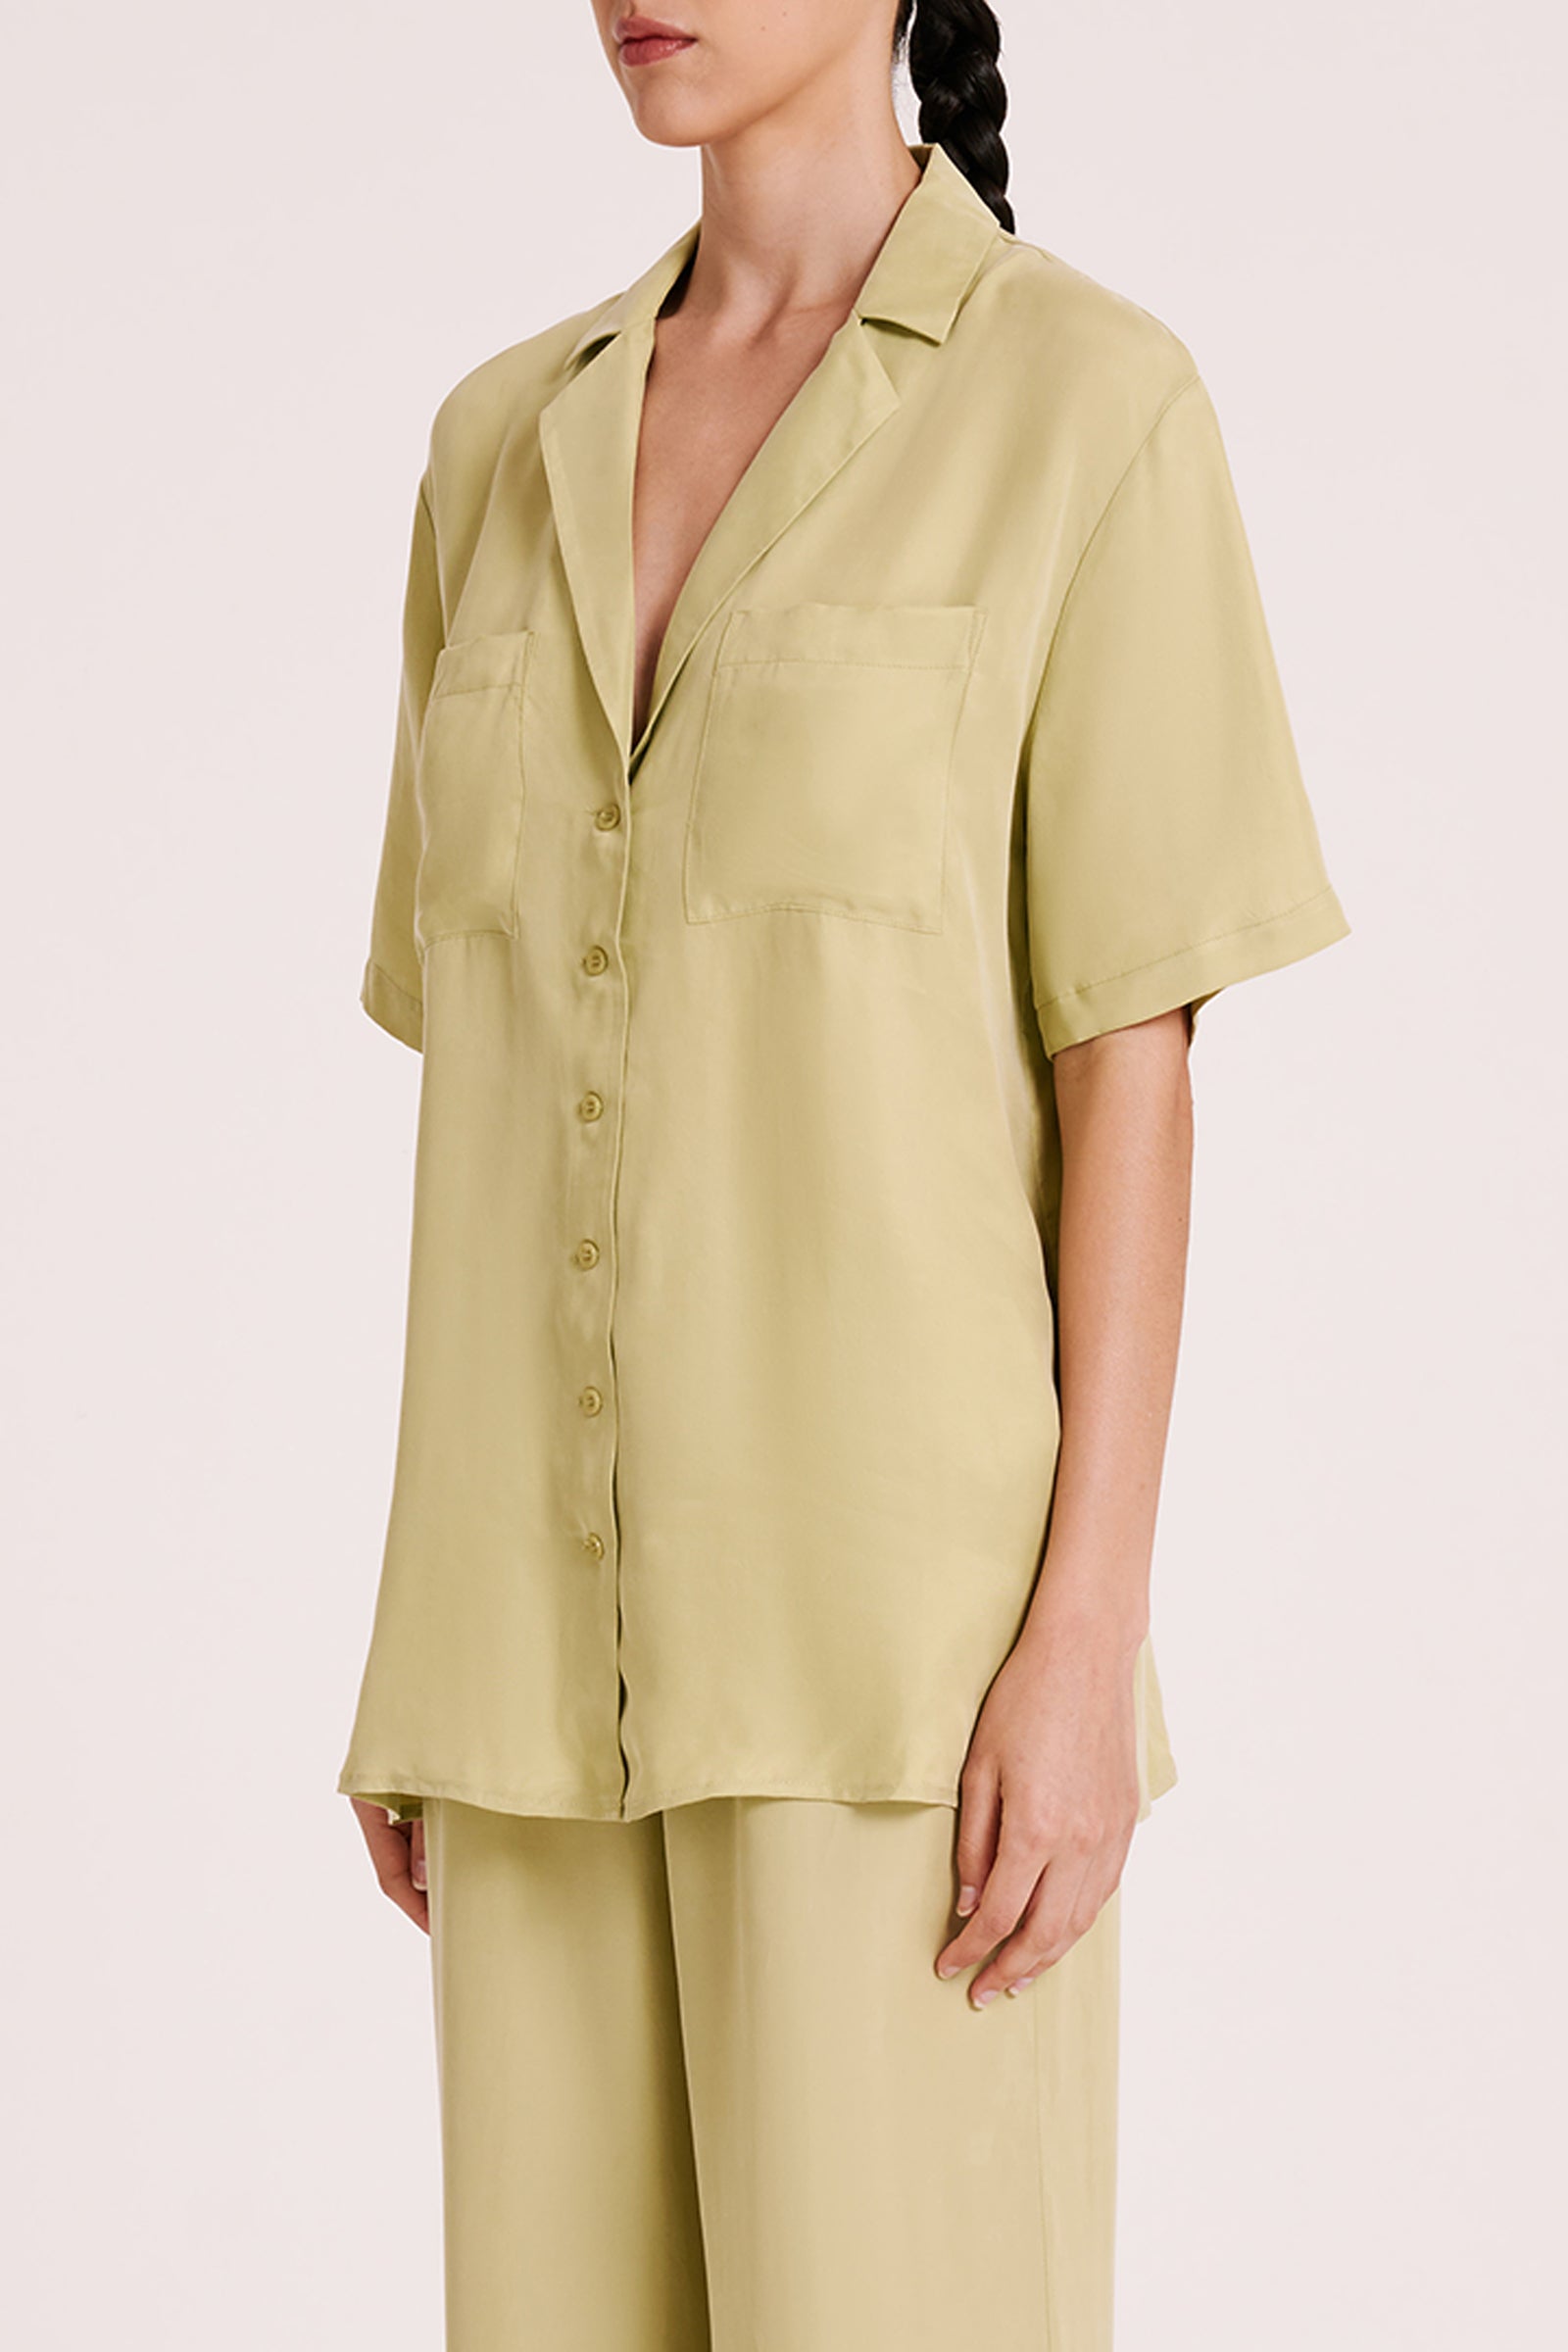 Lucia Cupro Shirt Lime 